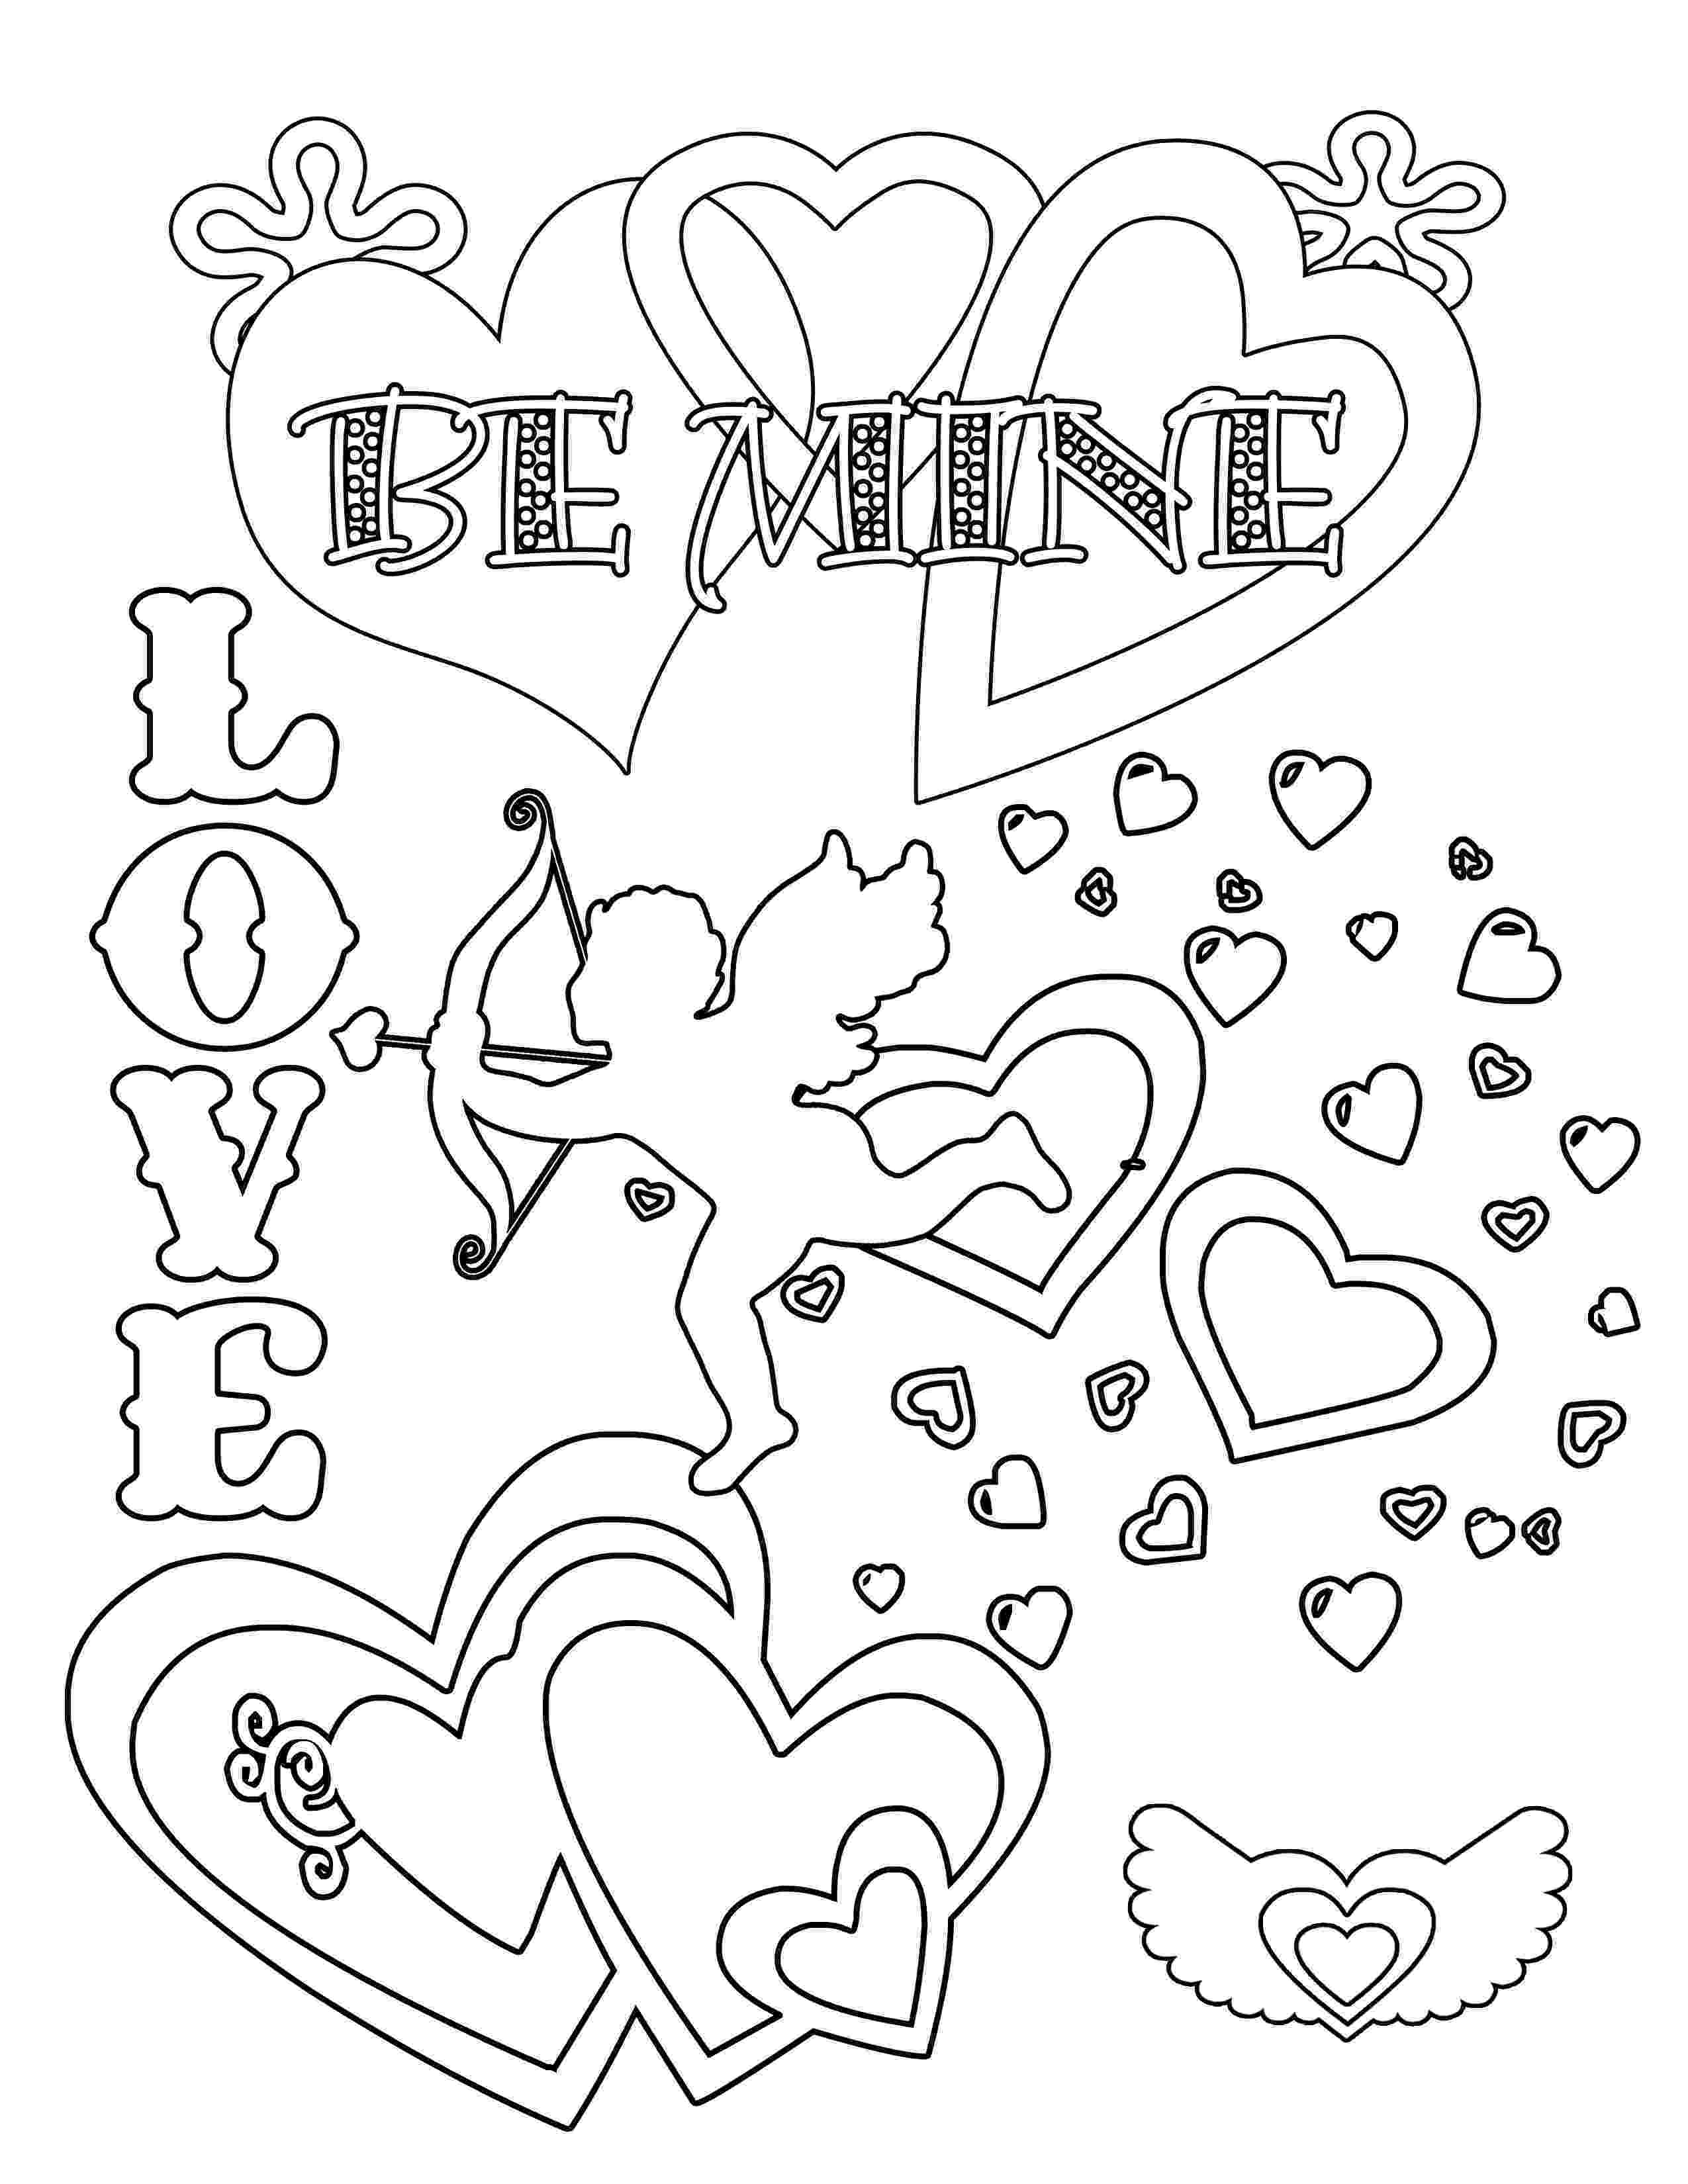 valentines printable coloring pages valentine coloring pages best coloring pages for kids coloring pages printable valentines 